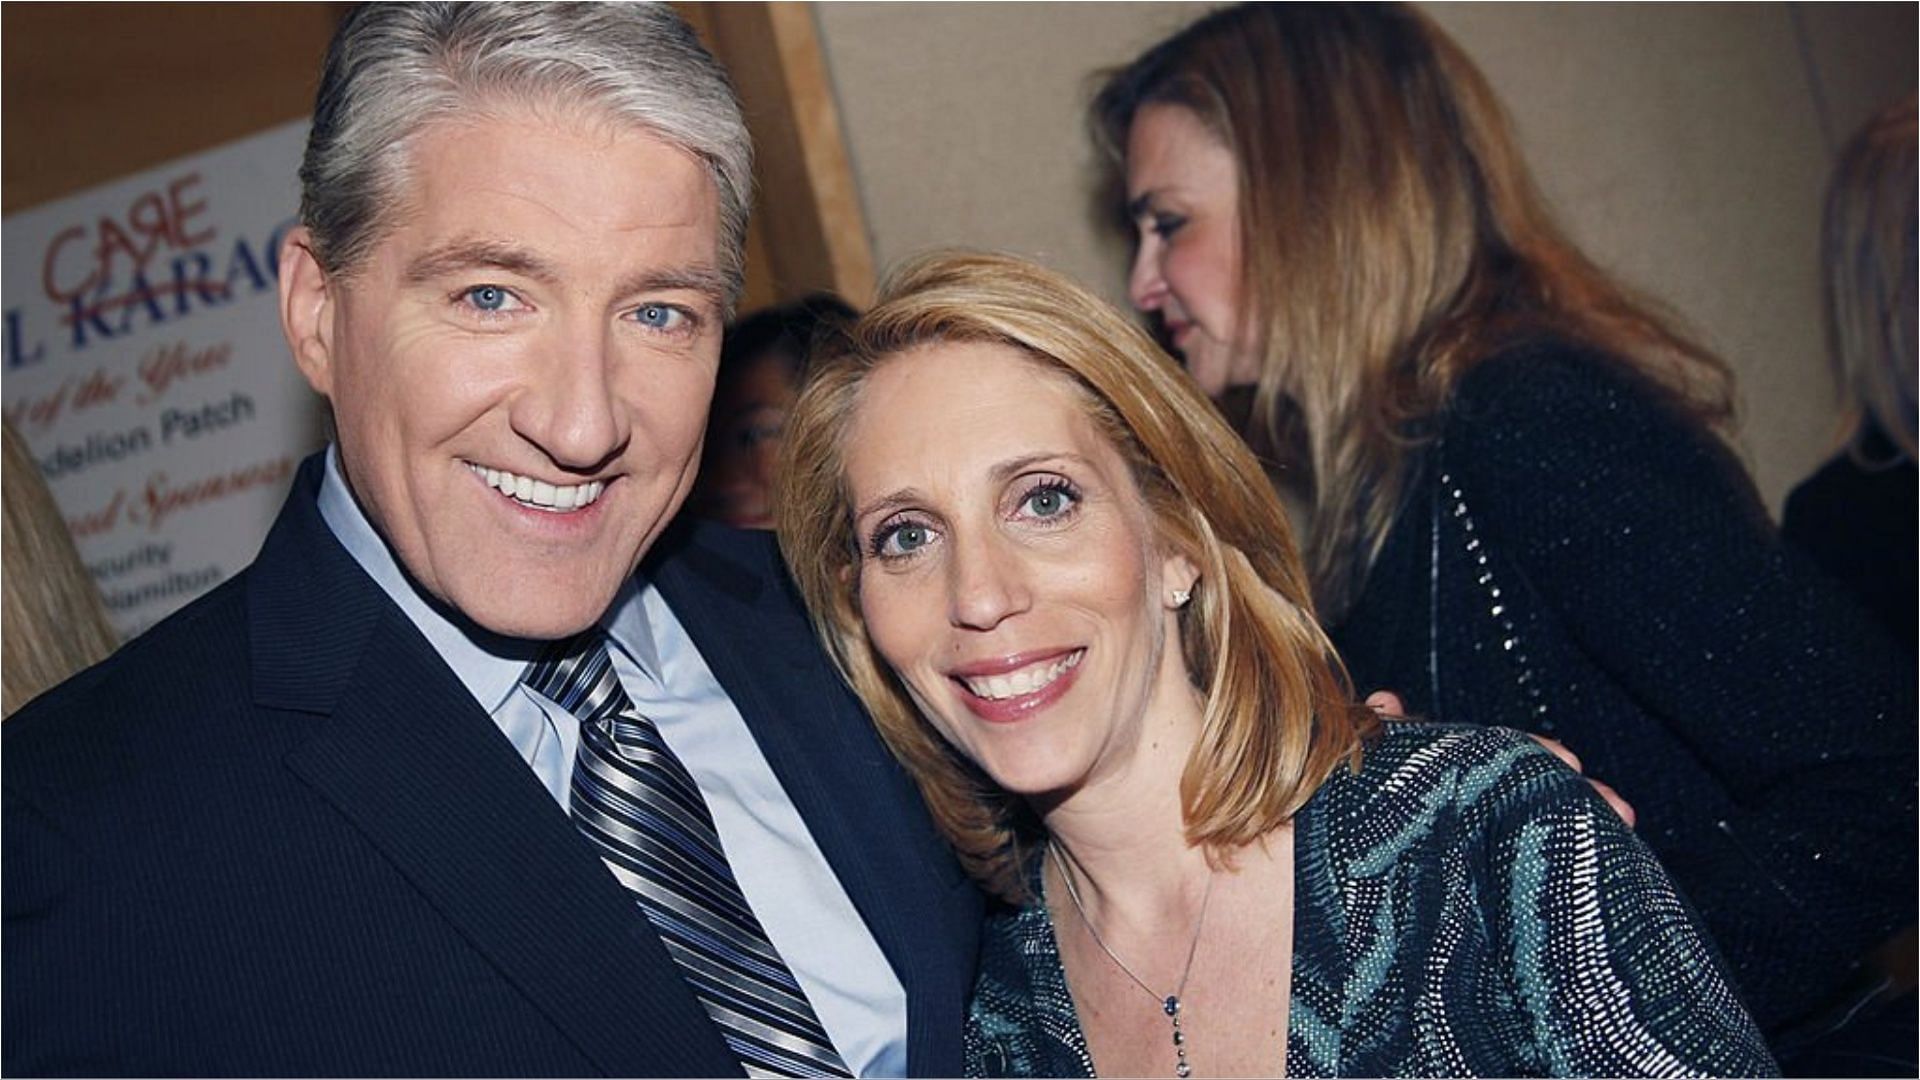 Why Did Dana Bash And John King Get Divorced All About Their Marriage Amid Inside Politics 